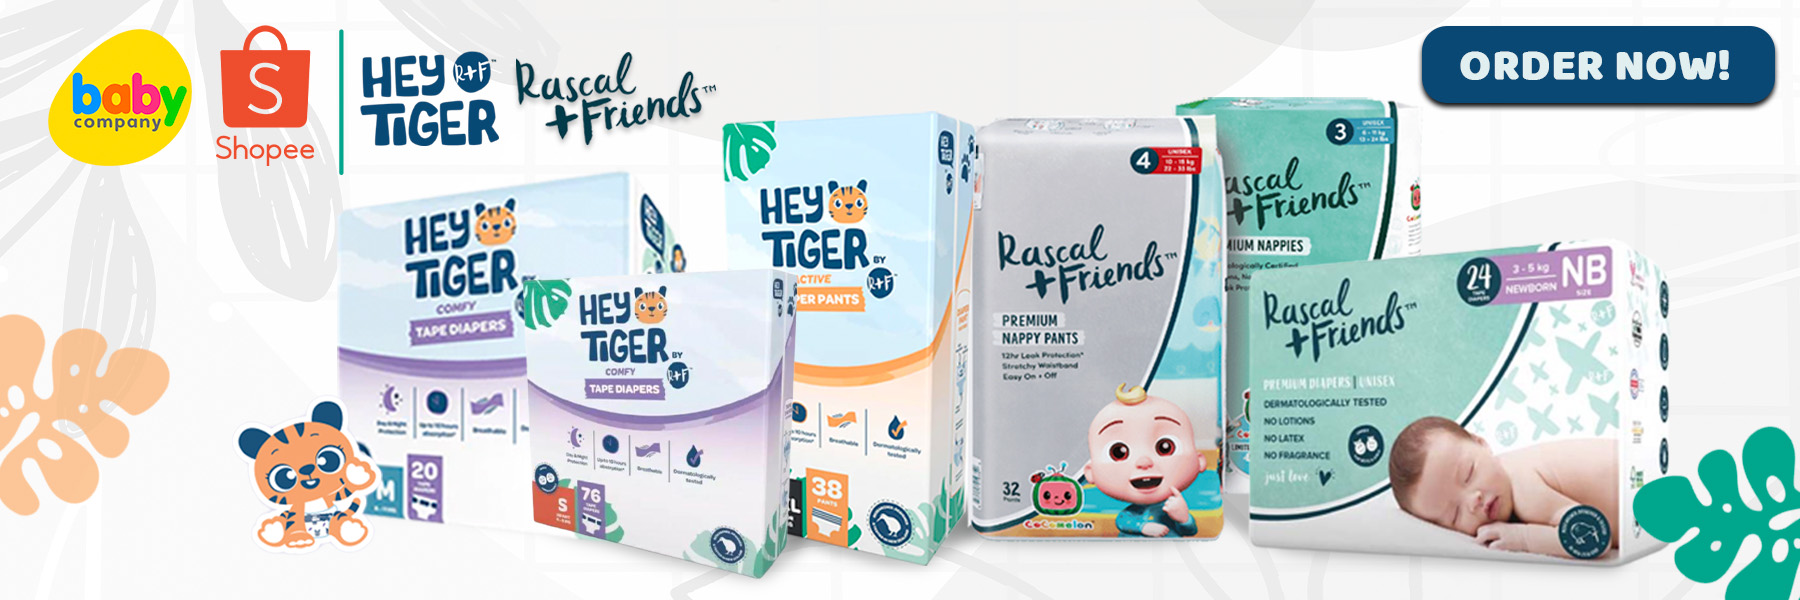 Hey Tiger & Rascal + Friends Collection